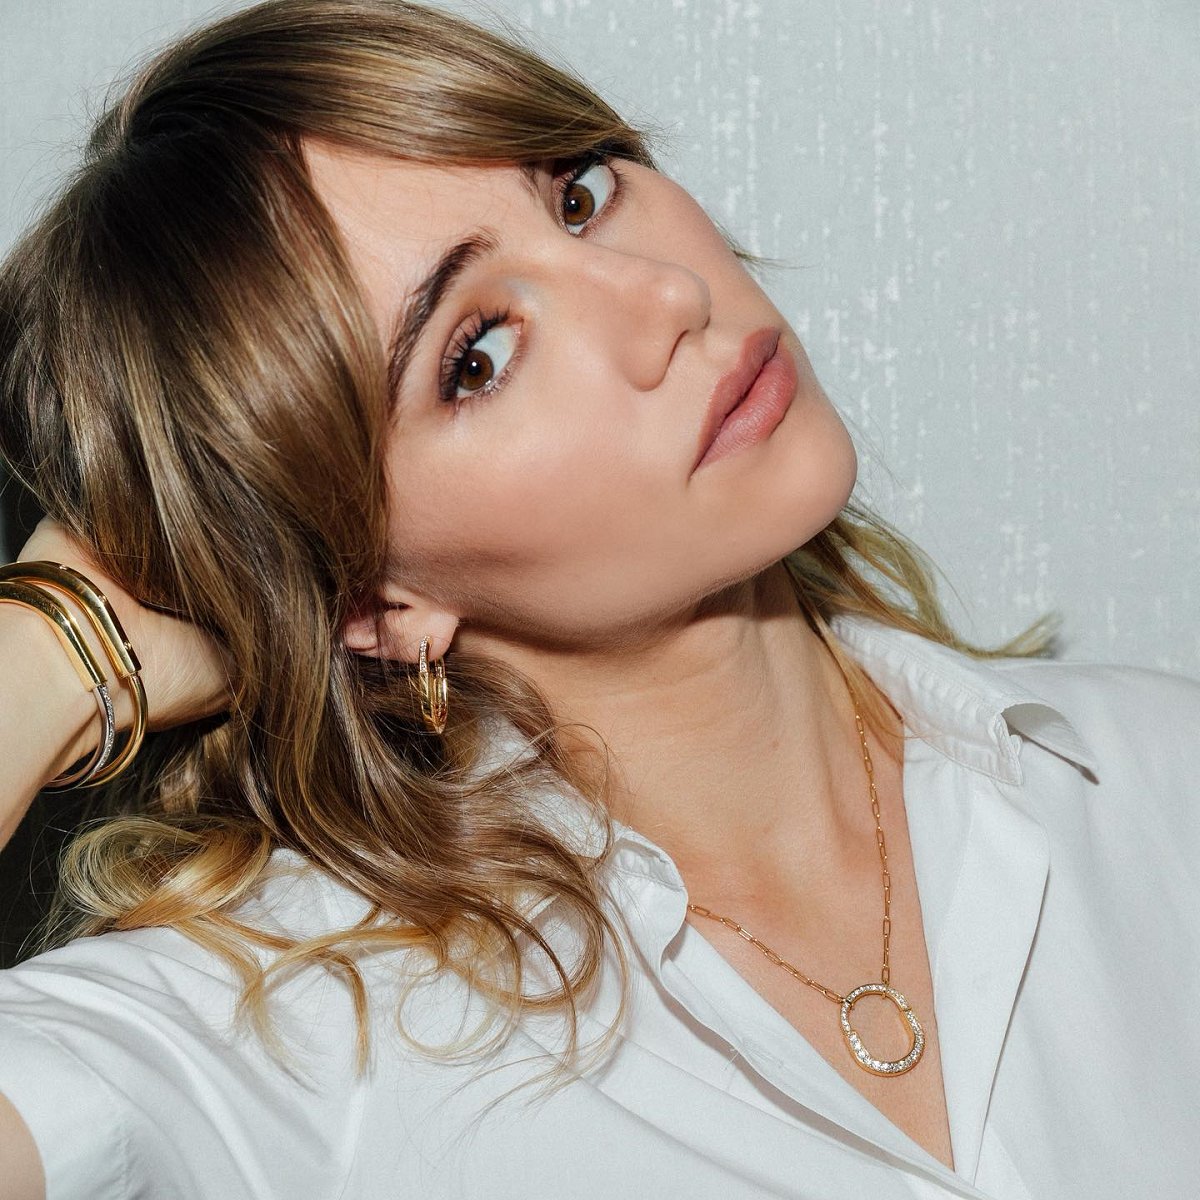 Suki Waterhouse will be bringing  'The Sparklemuffin Tour' to the Greek Theatre on Wednesday, October 23.

Bully will be opening the show.

Tickets will go on sale on Friday at 10 a.m. PT: bit.ly/3UDzDB8

#sukiwaterhouse #greektheatrela #justannounced